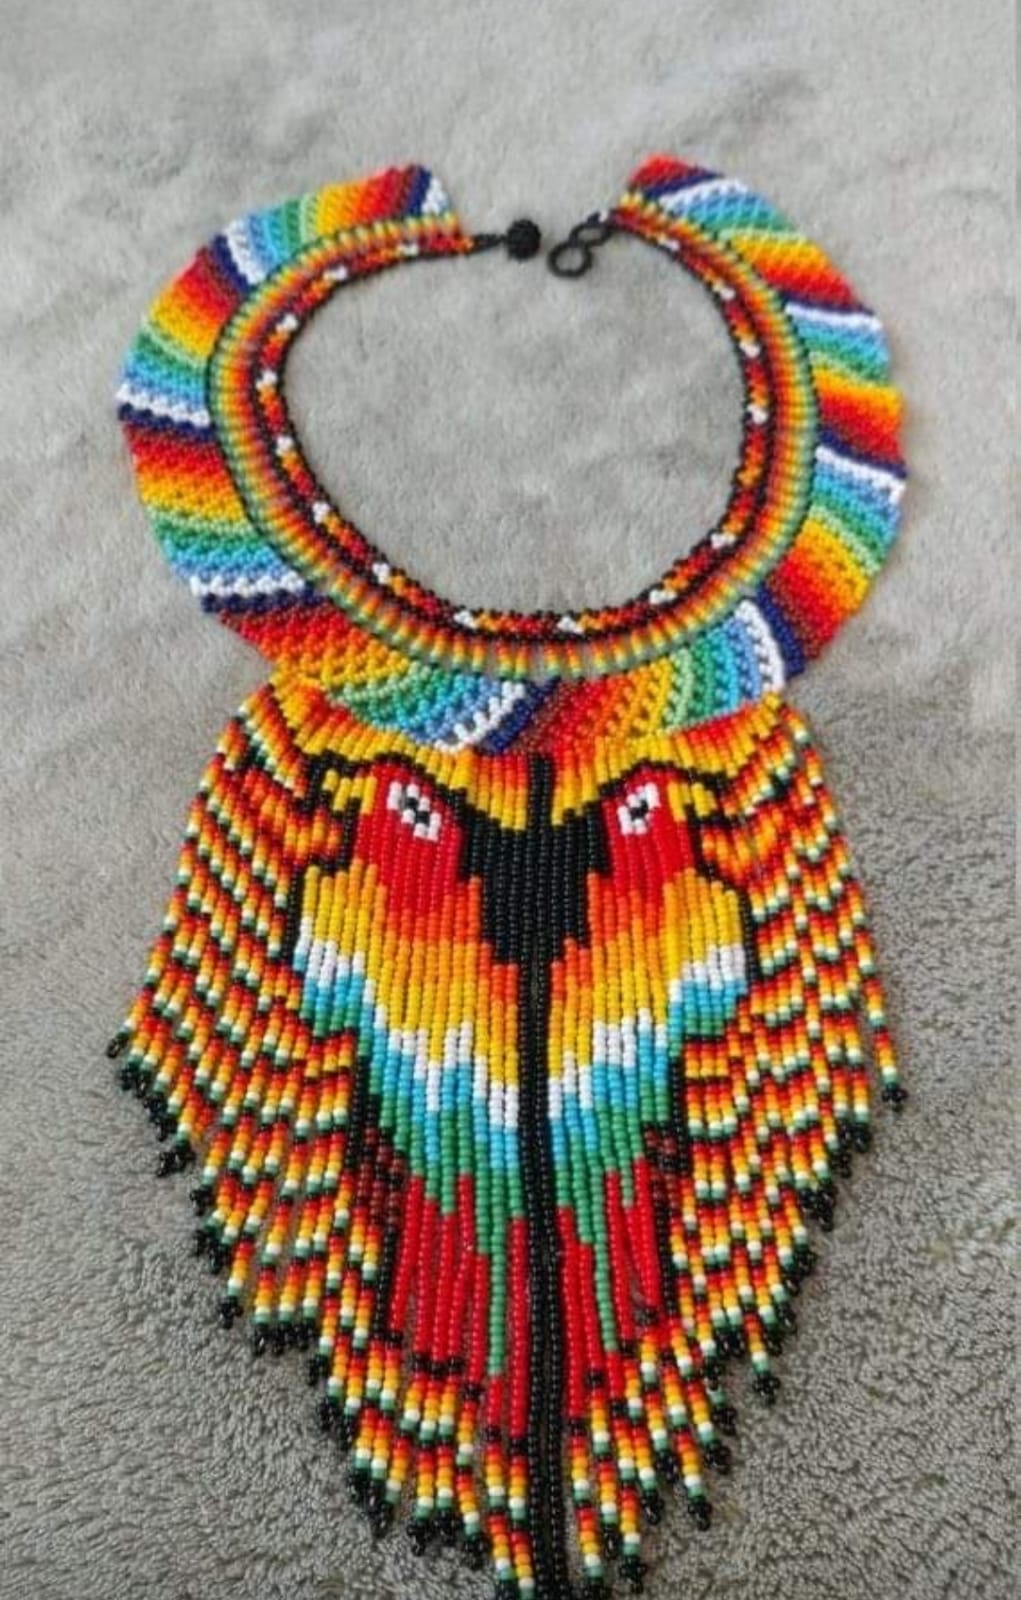 Colorful Necklace with Macaw Design Handmade by Ecuadorian Artisan Women 9